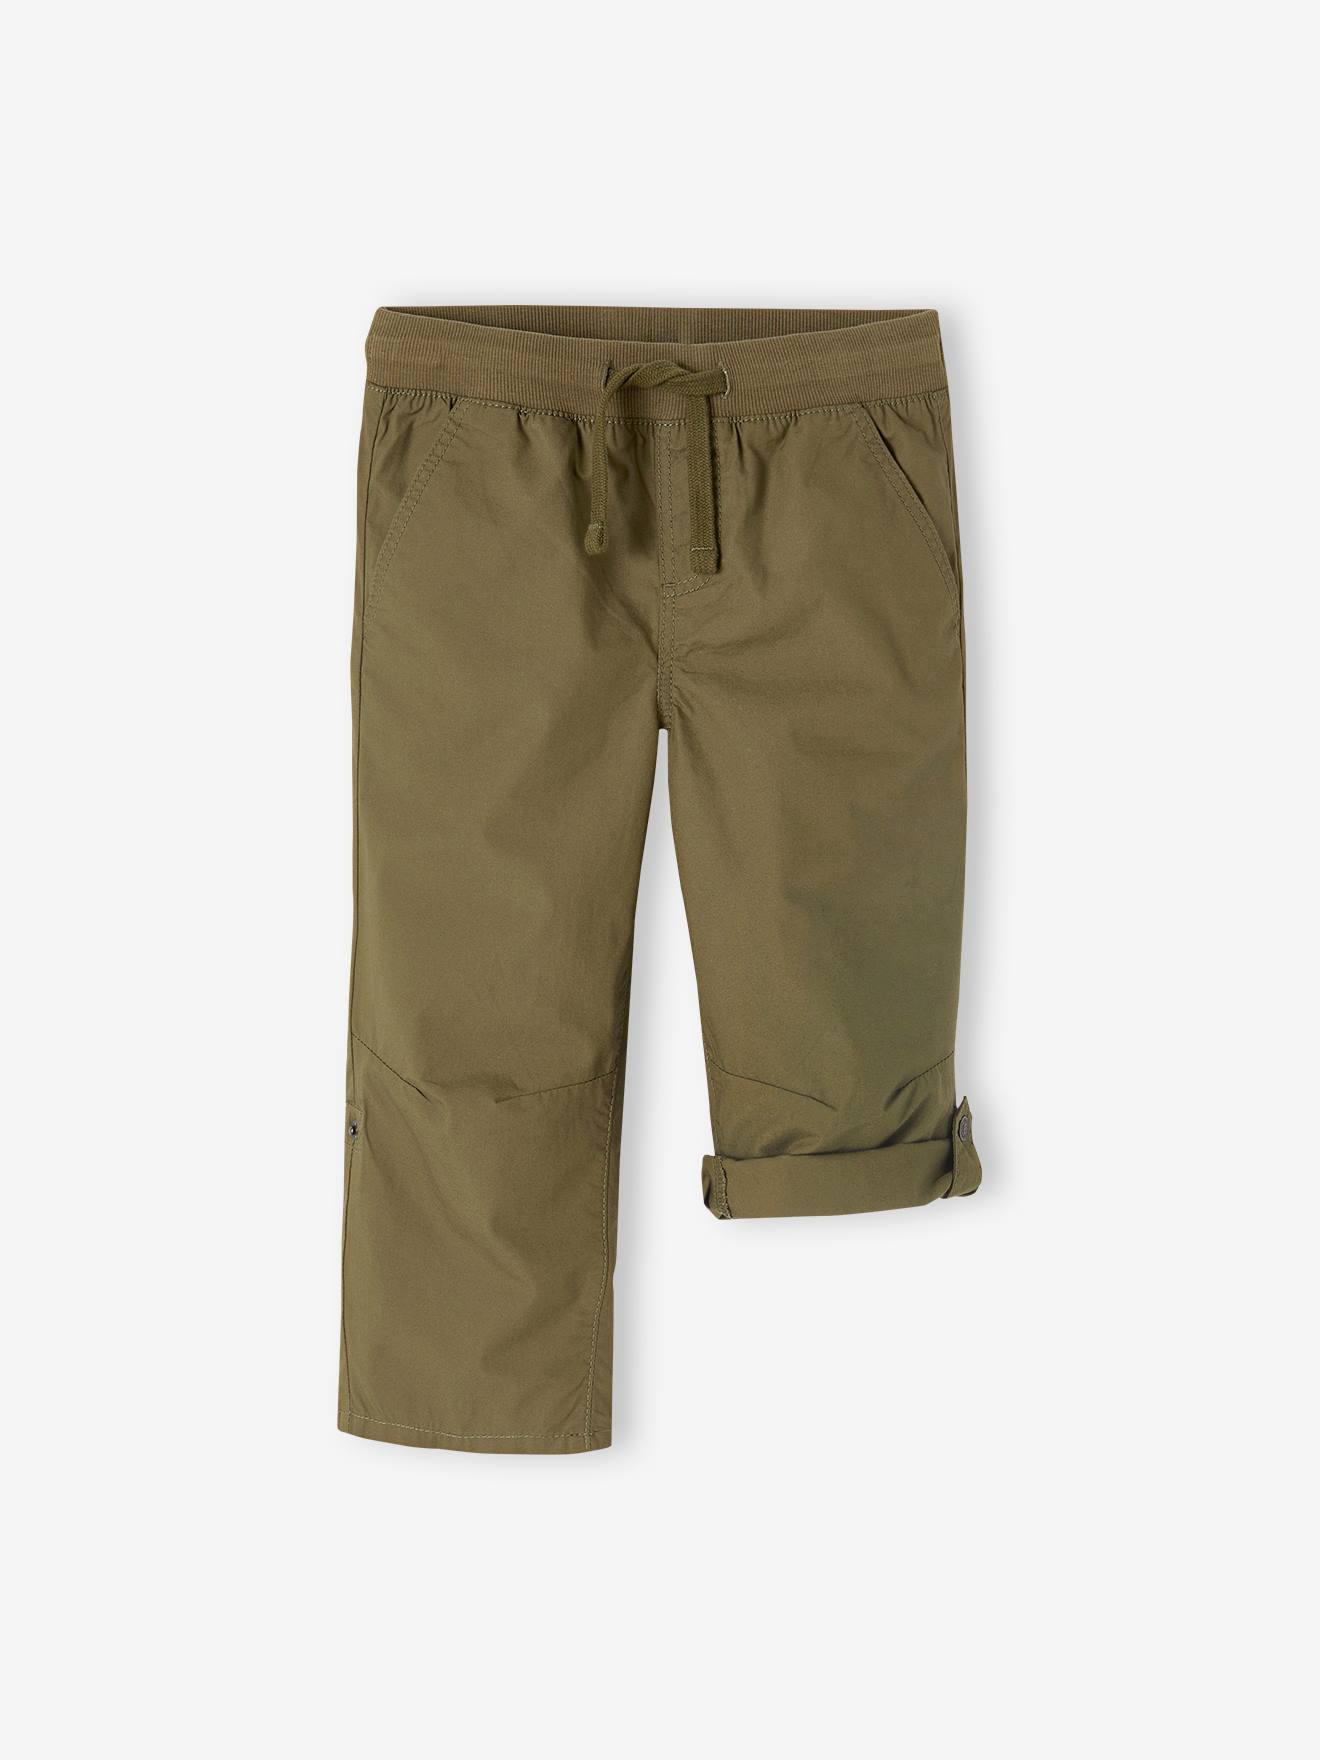 Cropped Lightweight Trousers Convert into Bermuda Shorts, for Boys olive